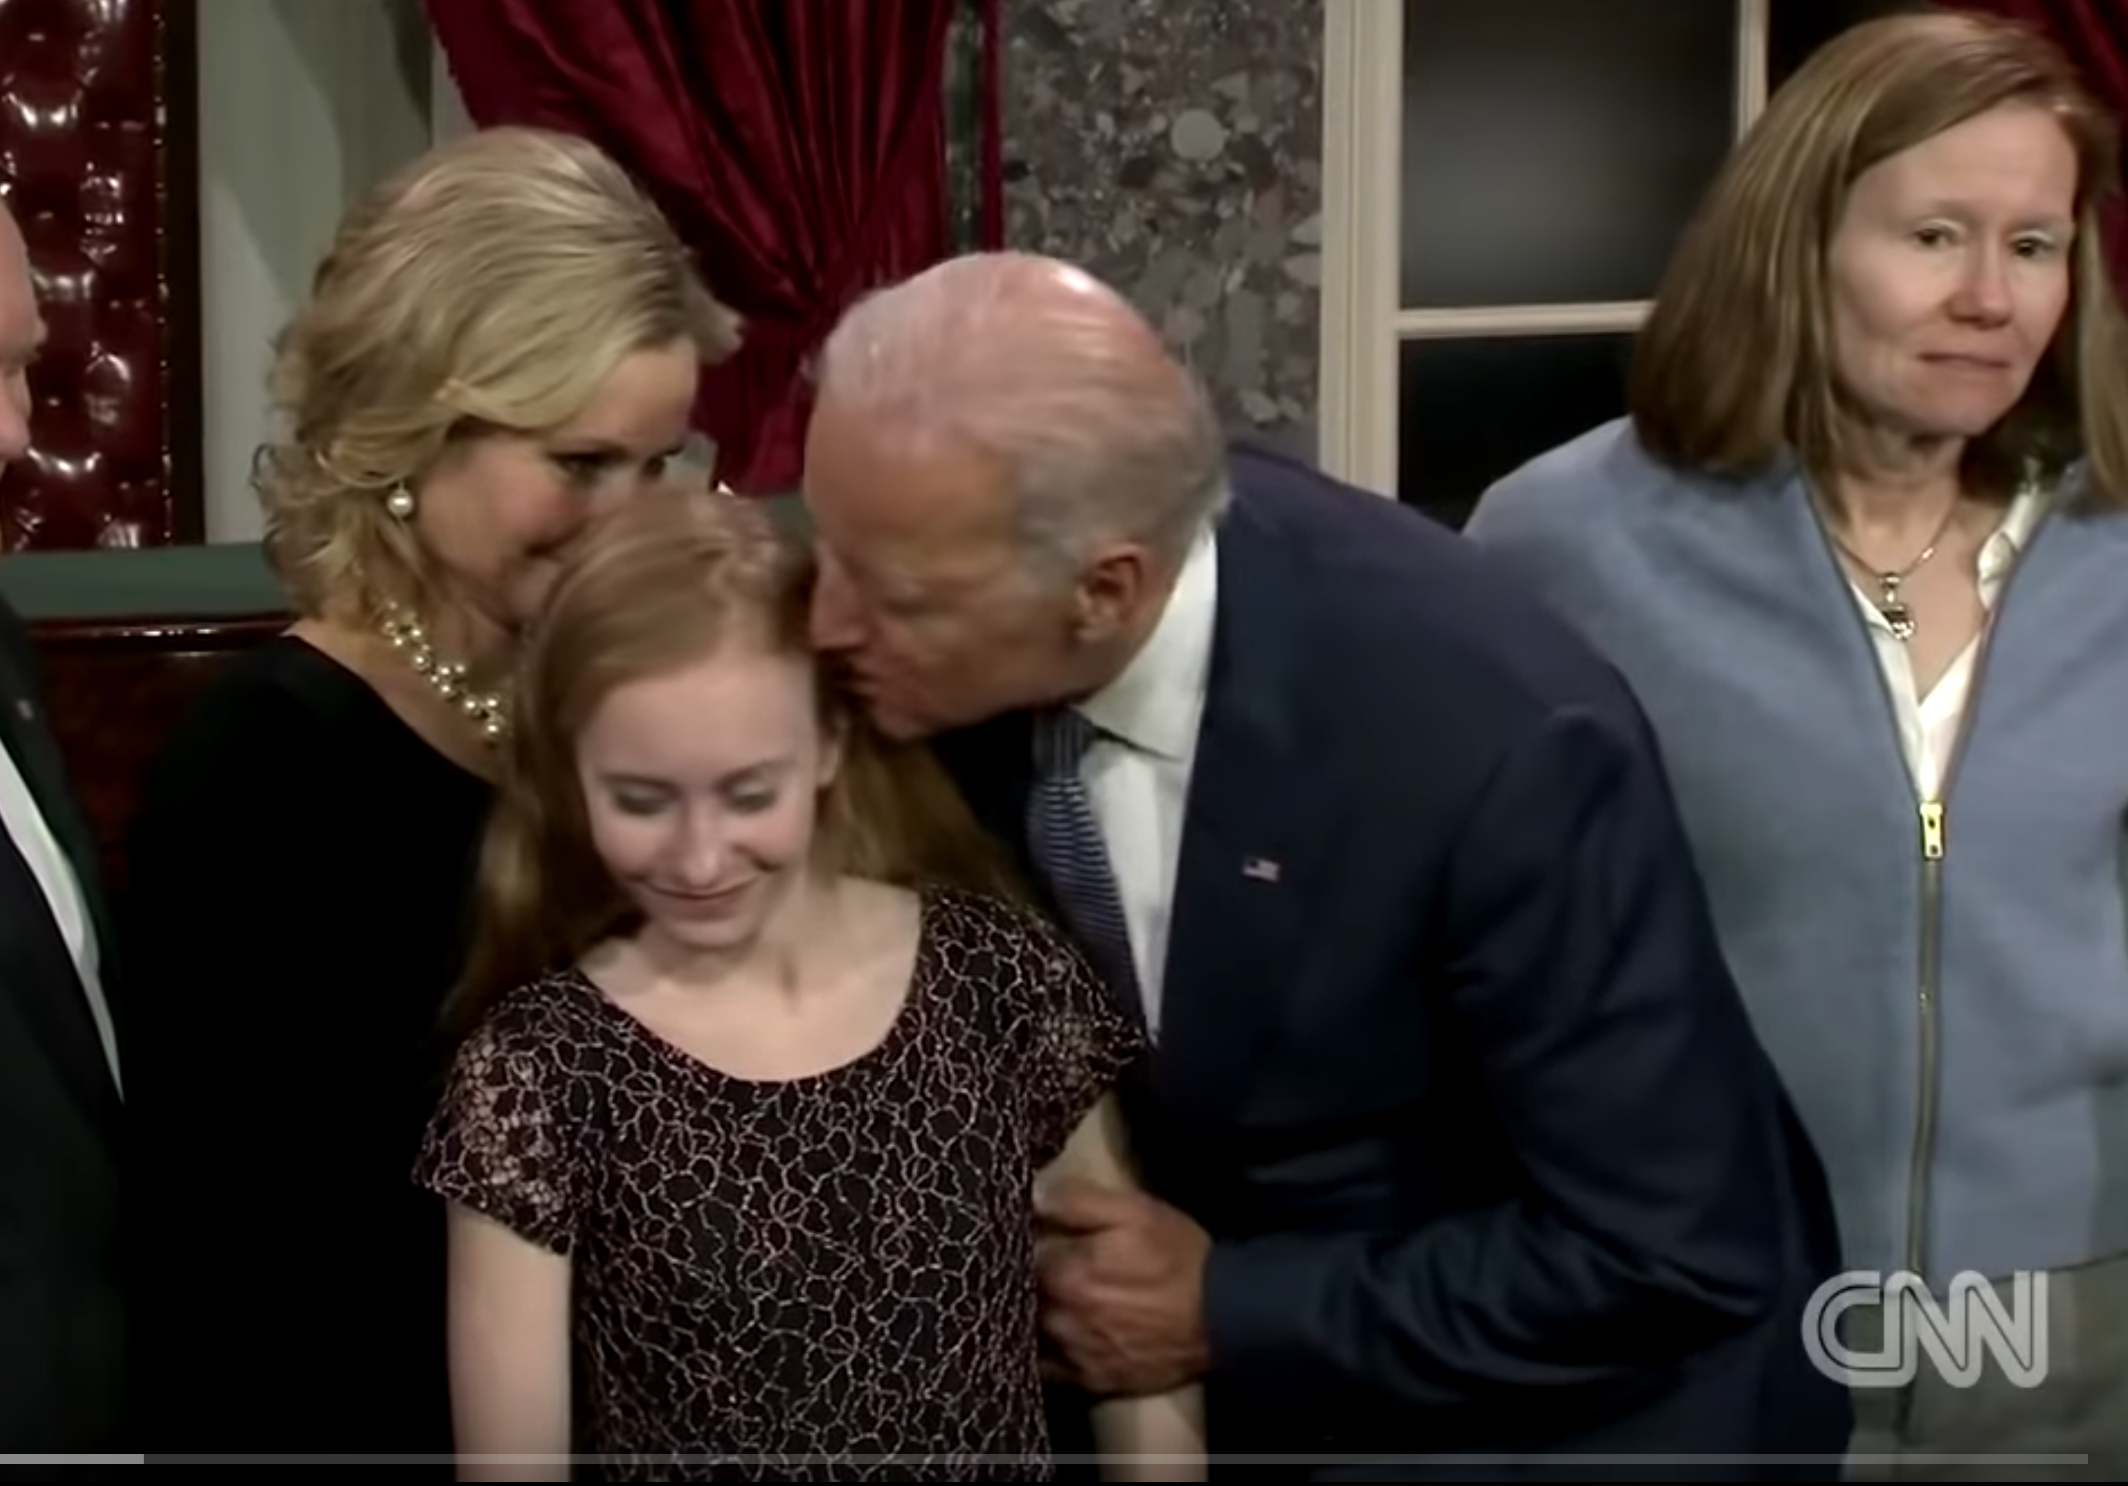 Biden 2020 - The Hands On for the Children Candidate Blank Meme Template